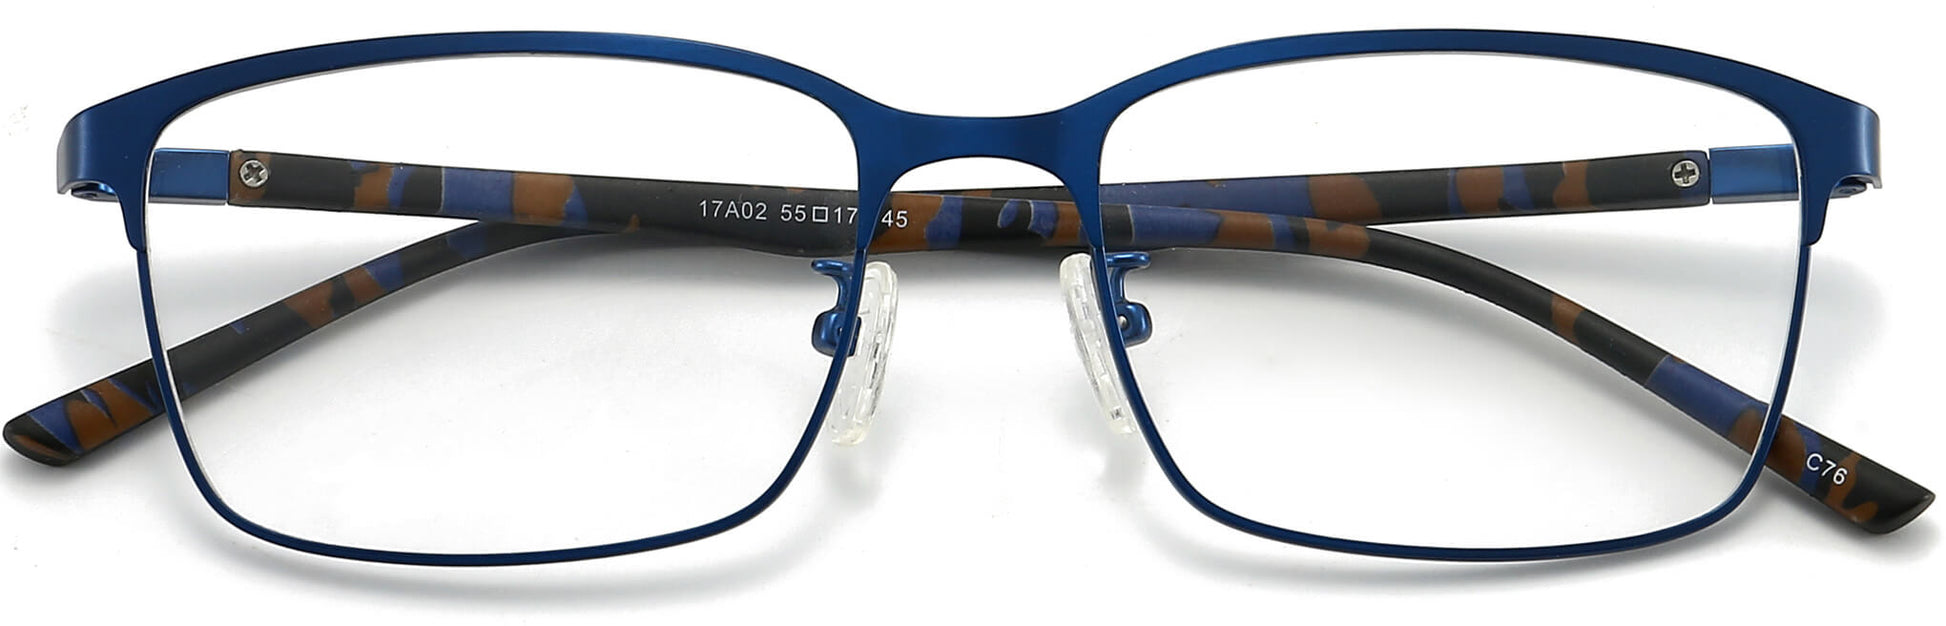 Hereford rectangle blue Eyeglasses from ANRRI, closed view